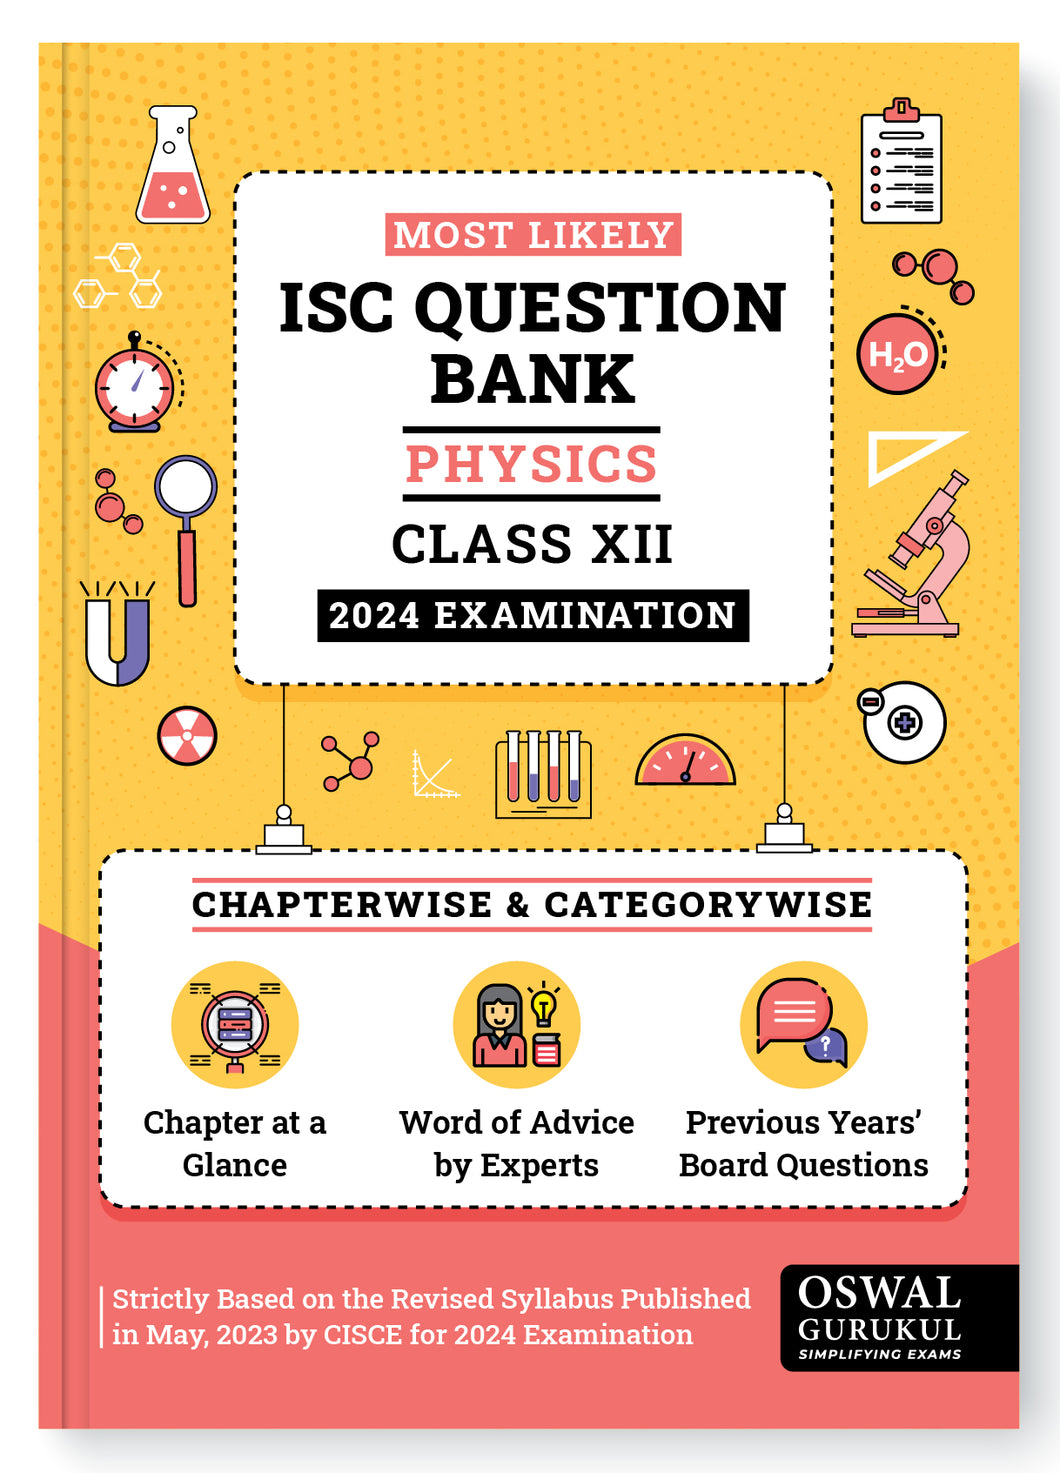 Oswal - Gurukul Physics Most Likely Question Bank : ISC Class 12 for 2024 Exam